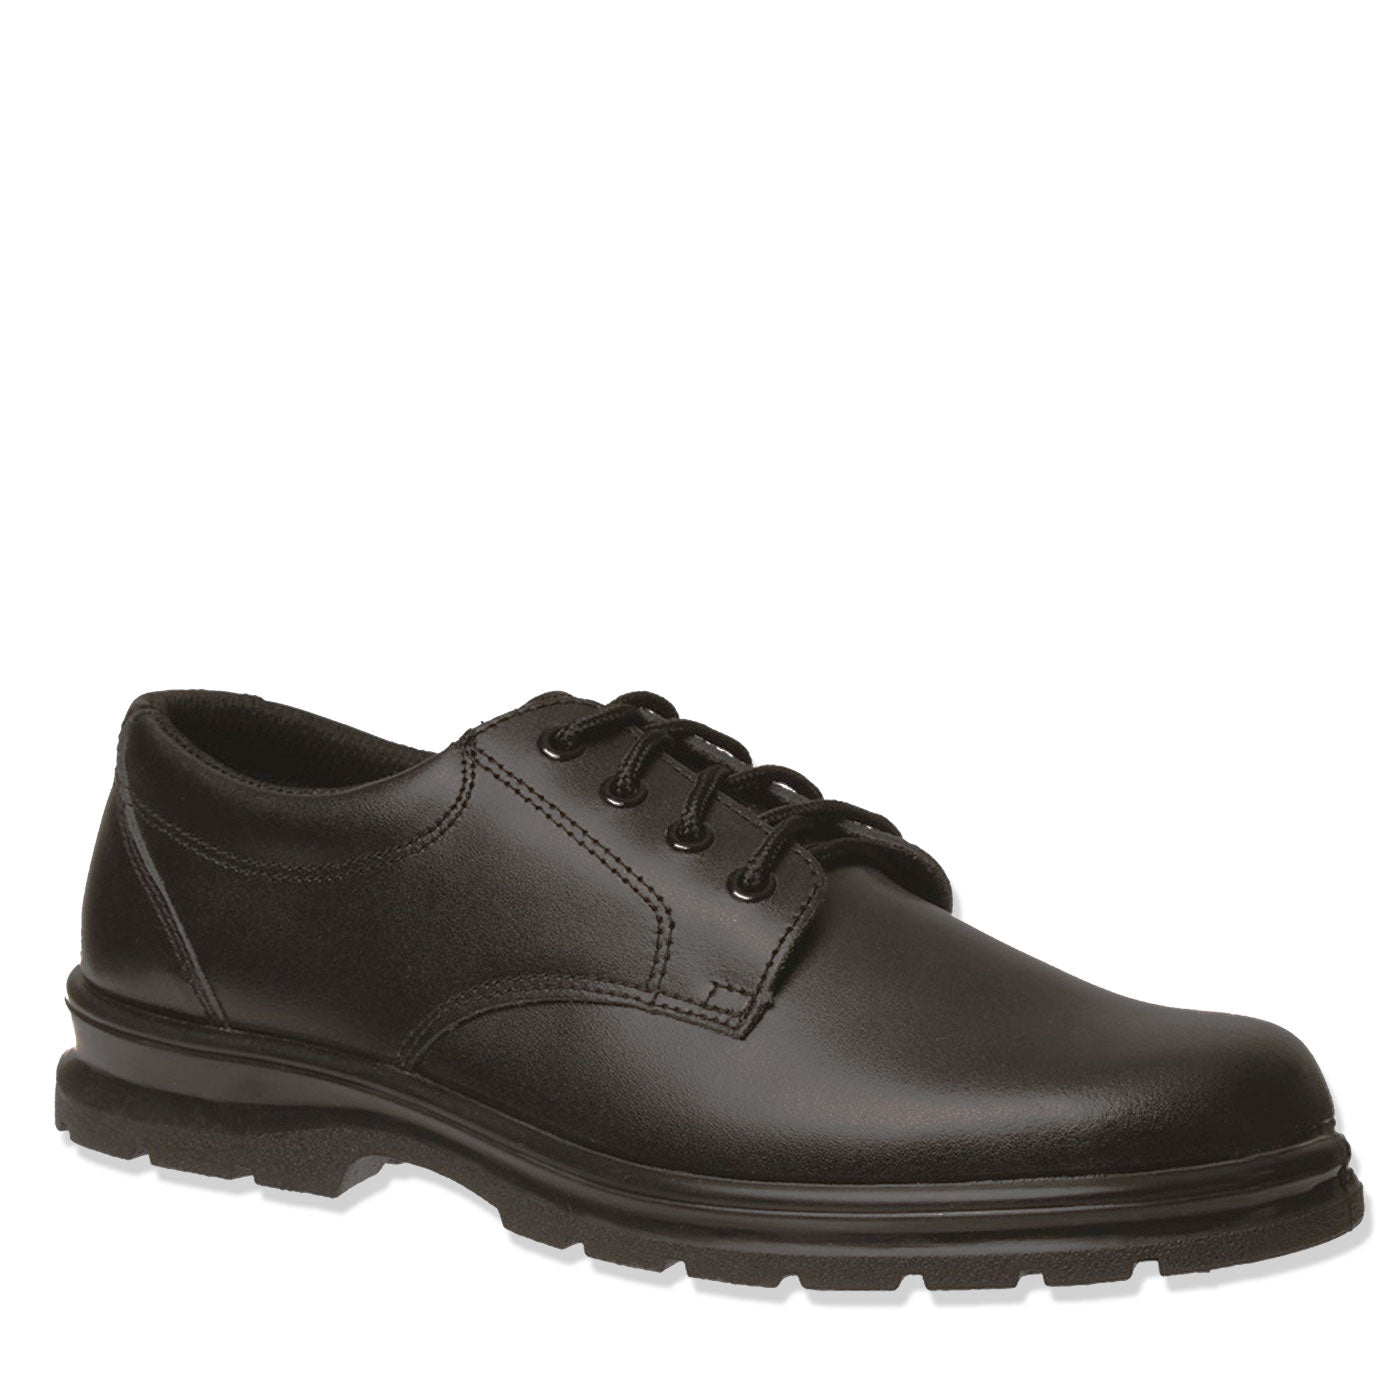 Grosby Leather Shoes Black Educate SNR 2